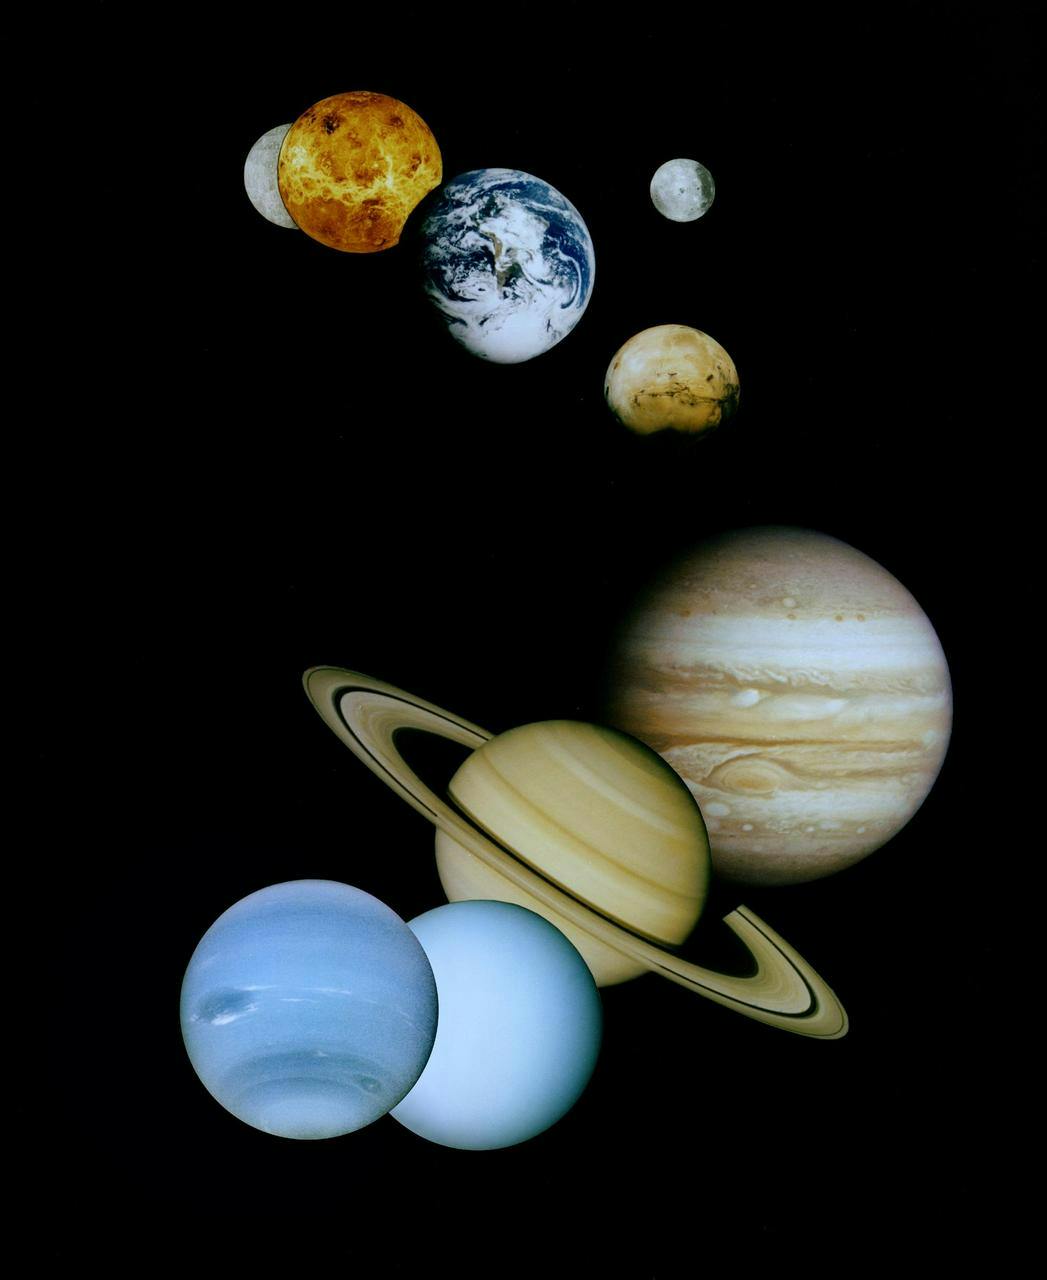 Montage of the solar system